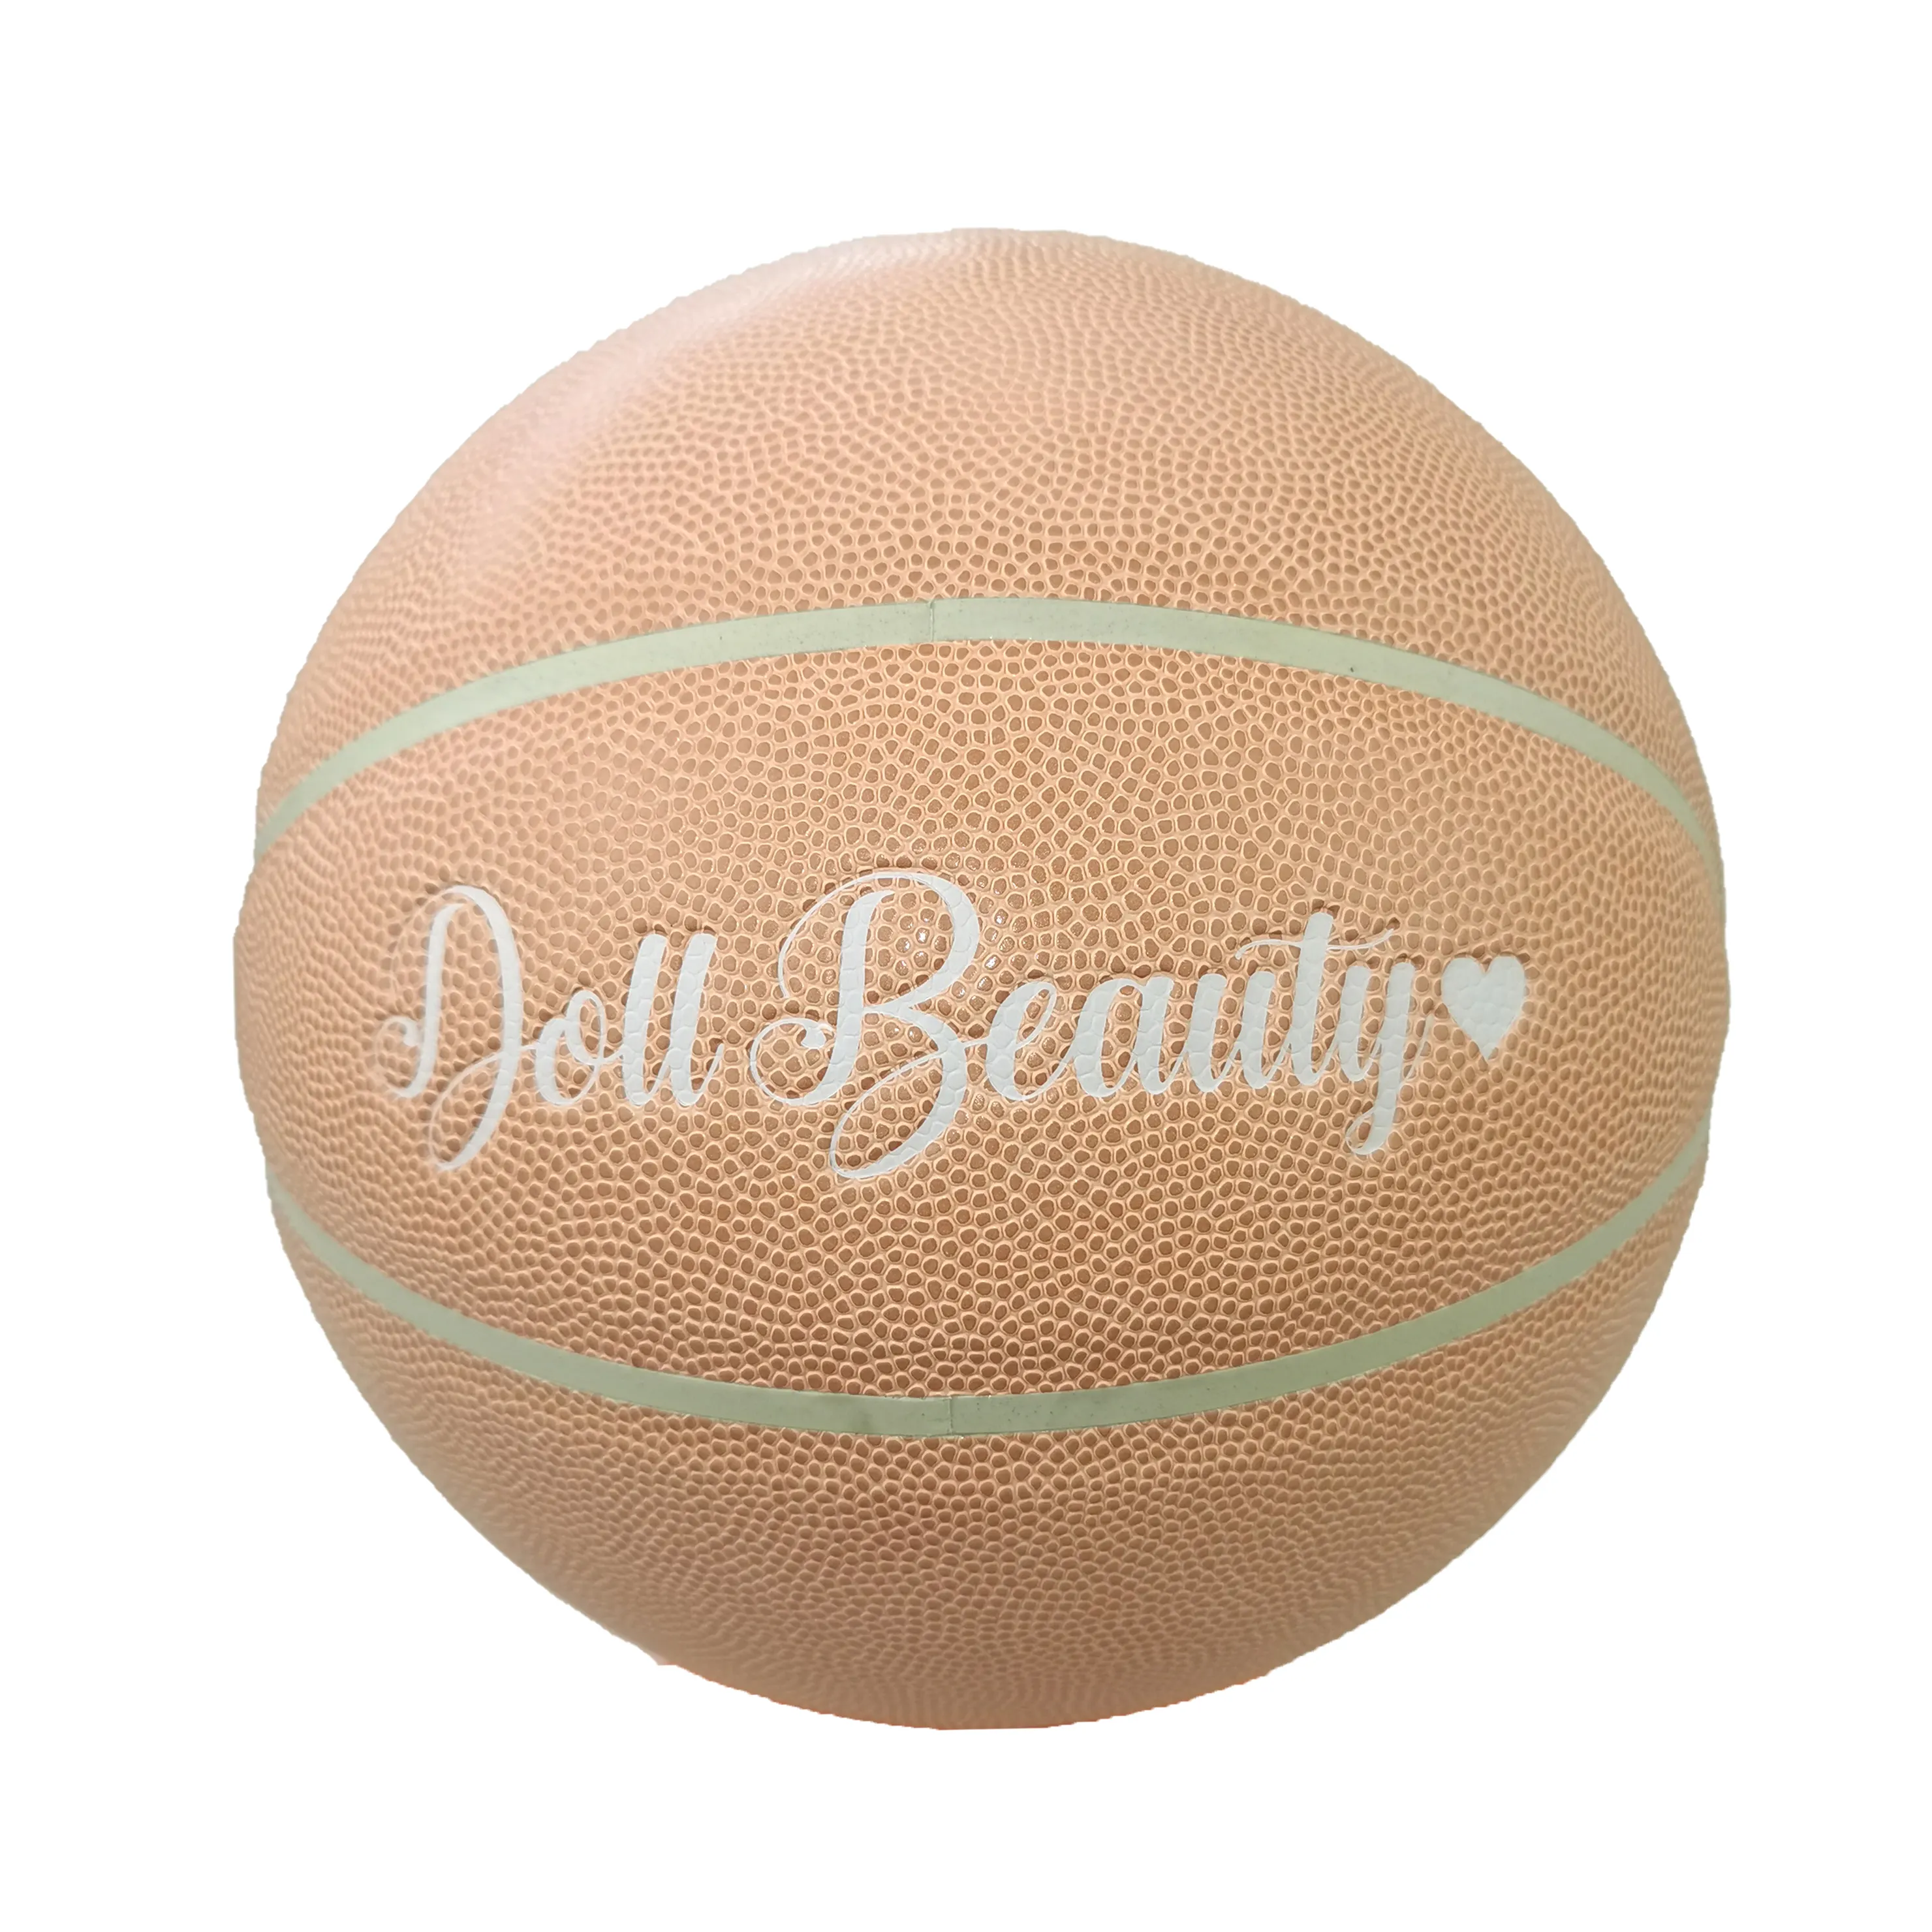 Fancy competition pink basketball for woman and kids size 7 size 6 pu basketball from china factory